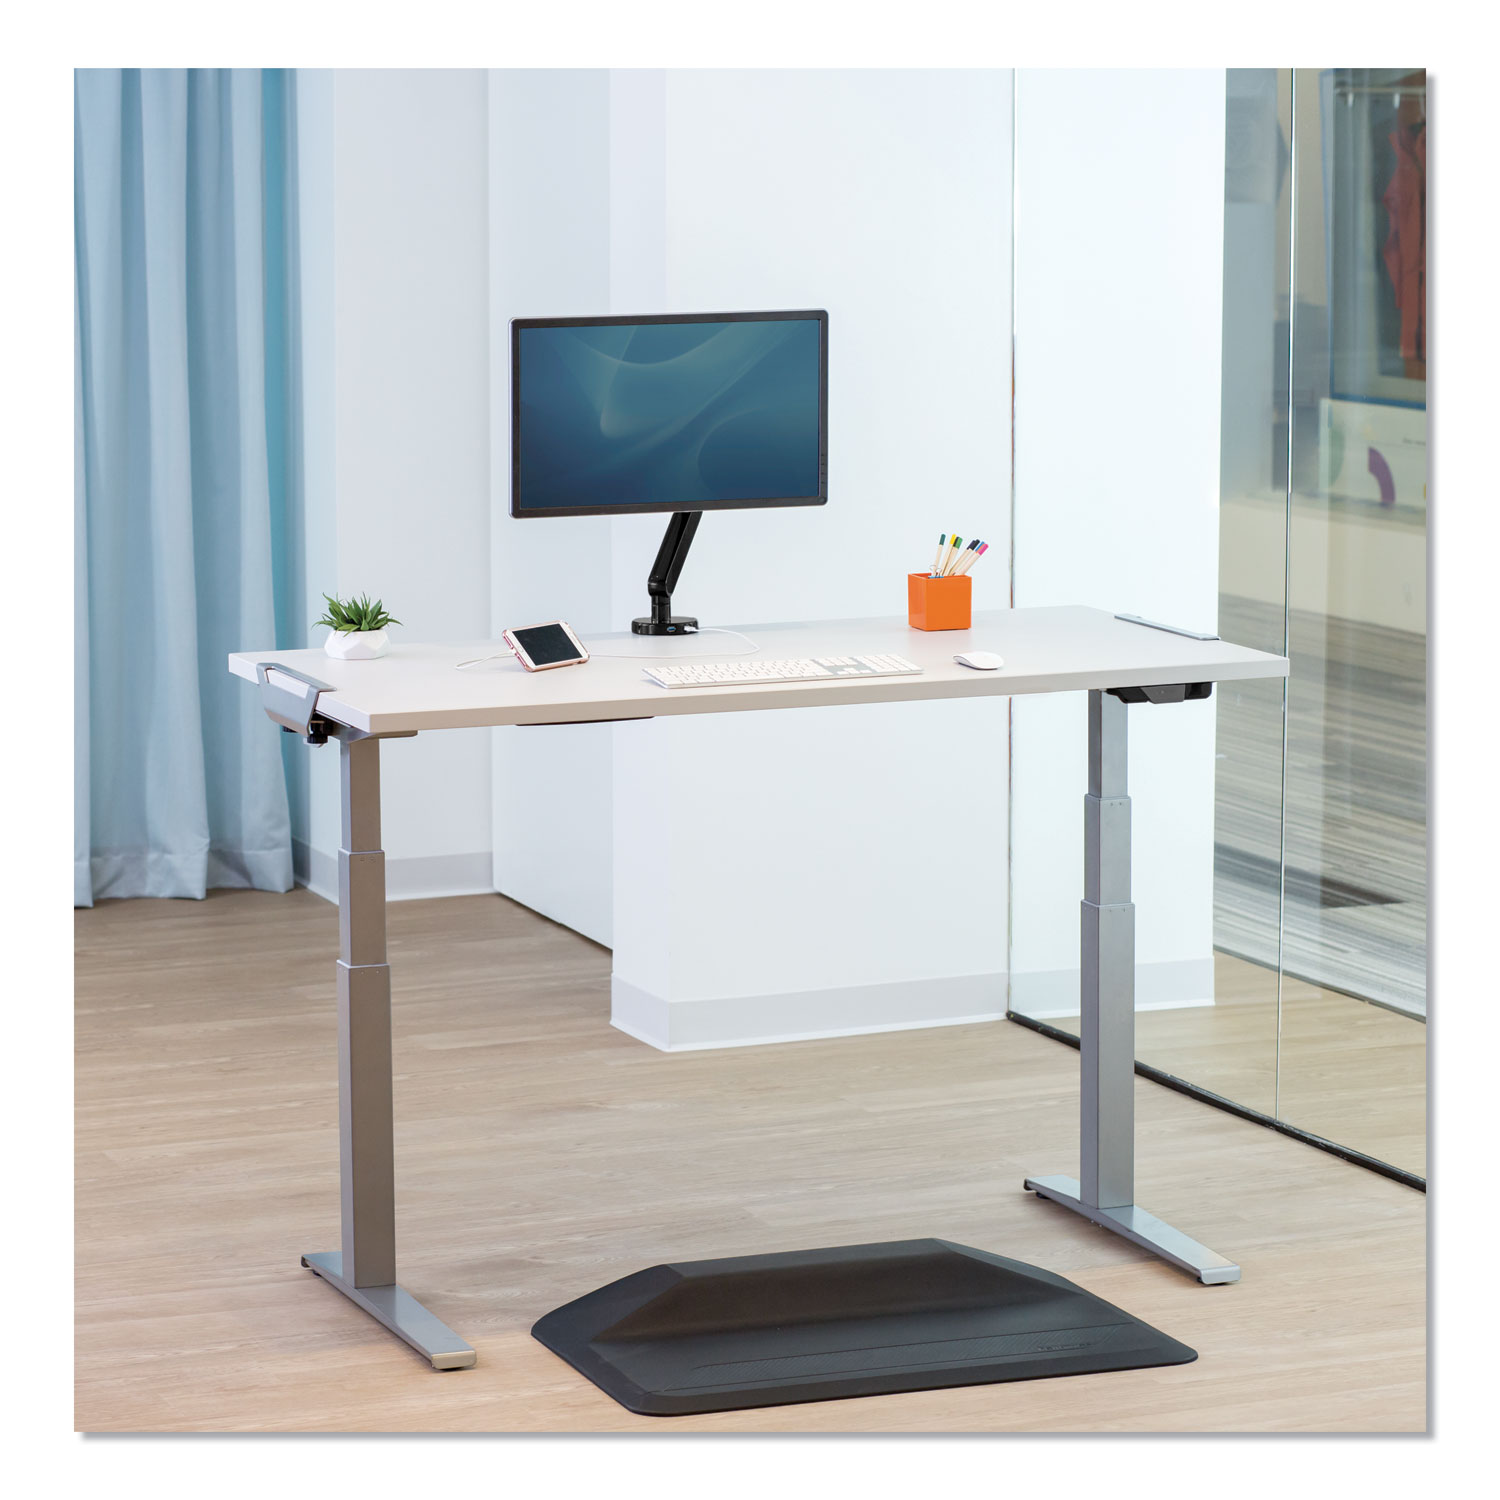  Fellowes 9649301 Levado Laminate Table Top (Top Only), 72w x 30d, White (FEL9649301) 